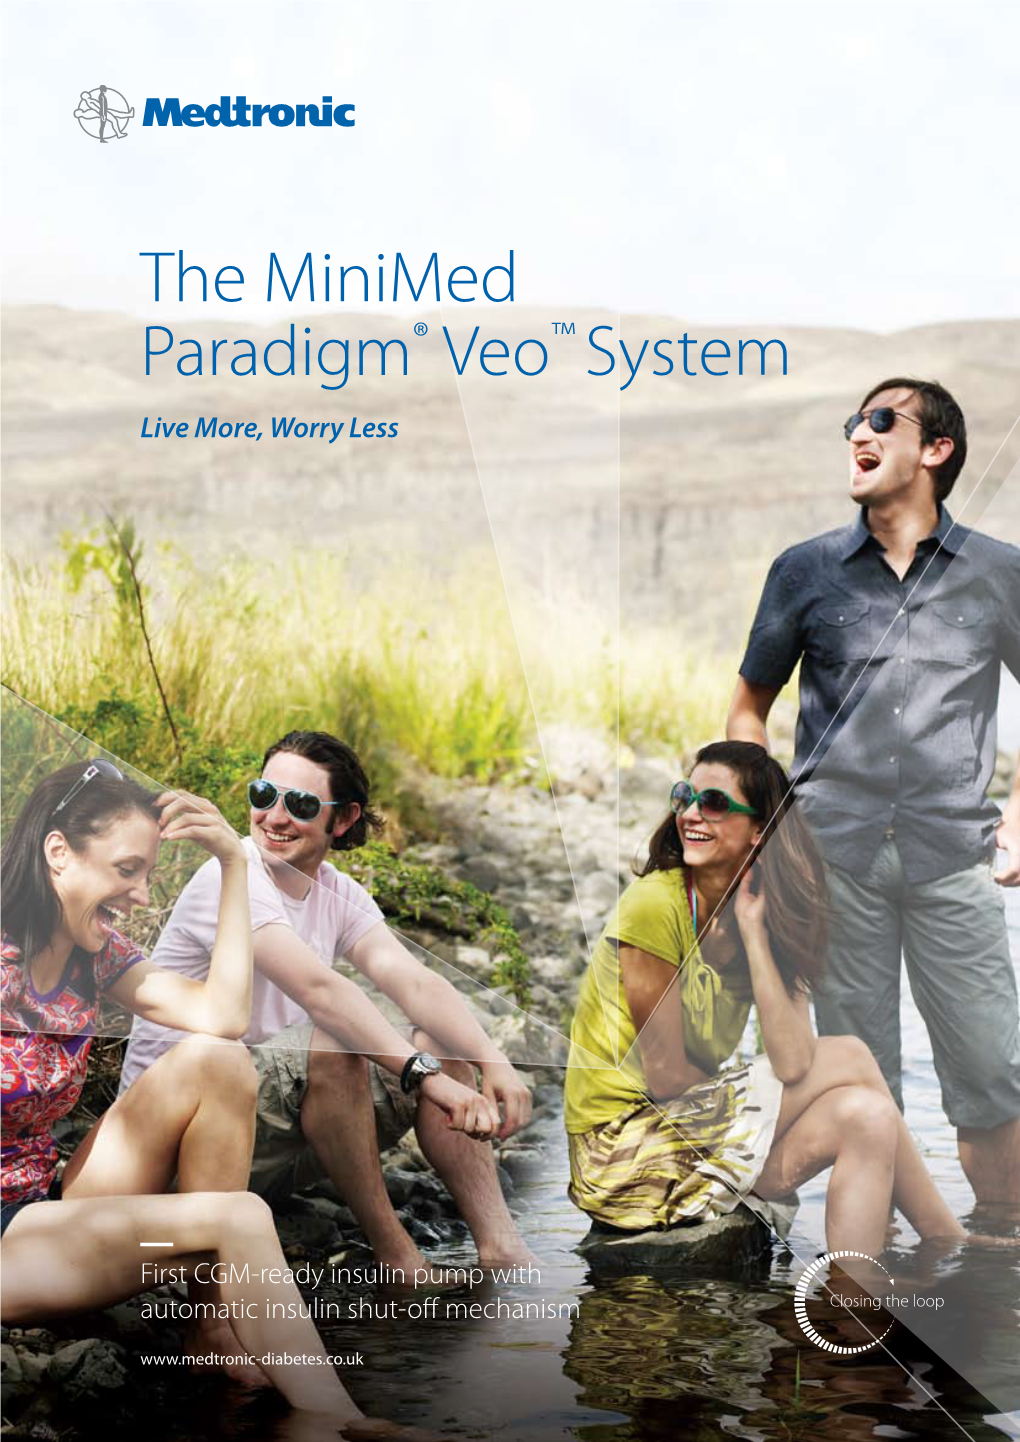 The Minimed Paradigm® Veo™ System Live More, Worry Less